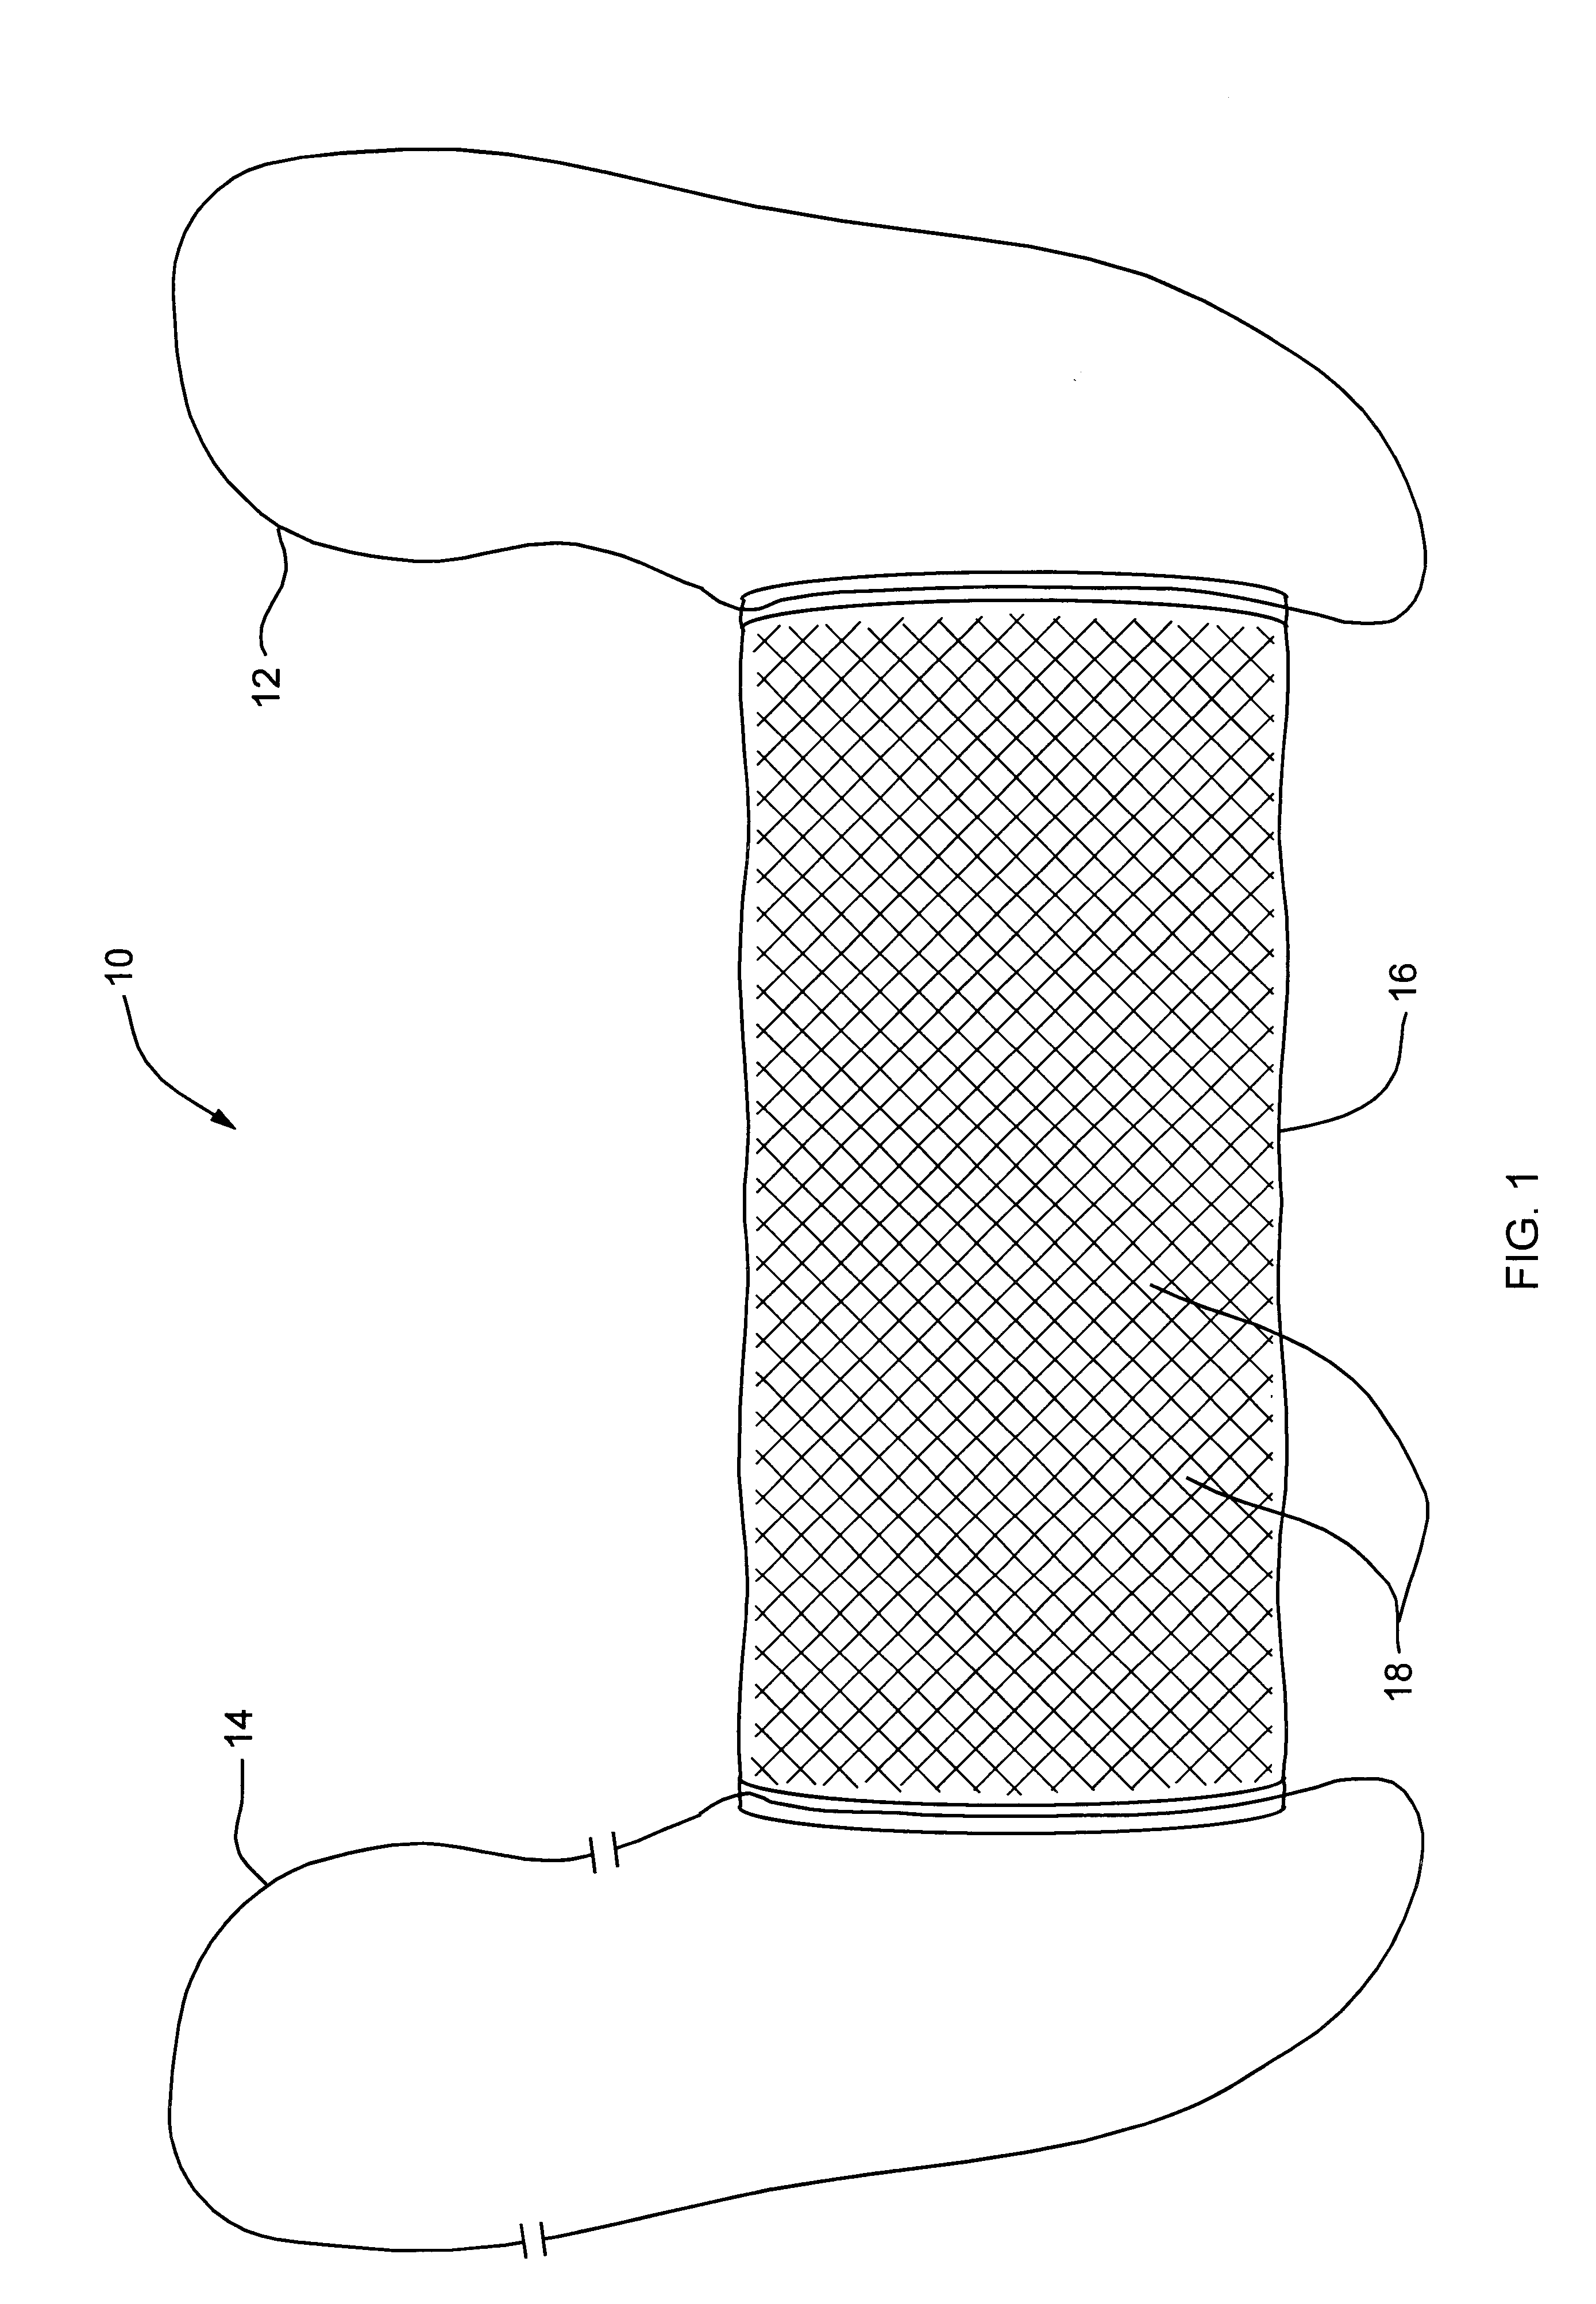 Absorbable pubovaginal sling system and method